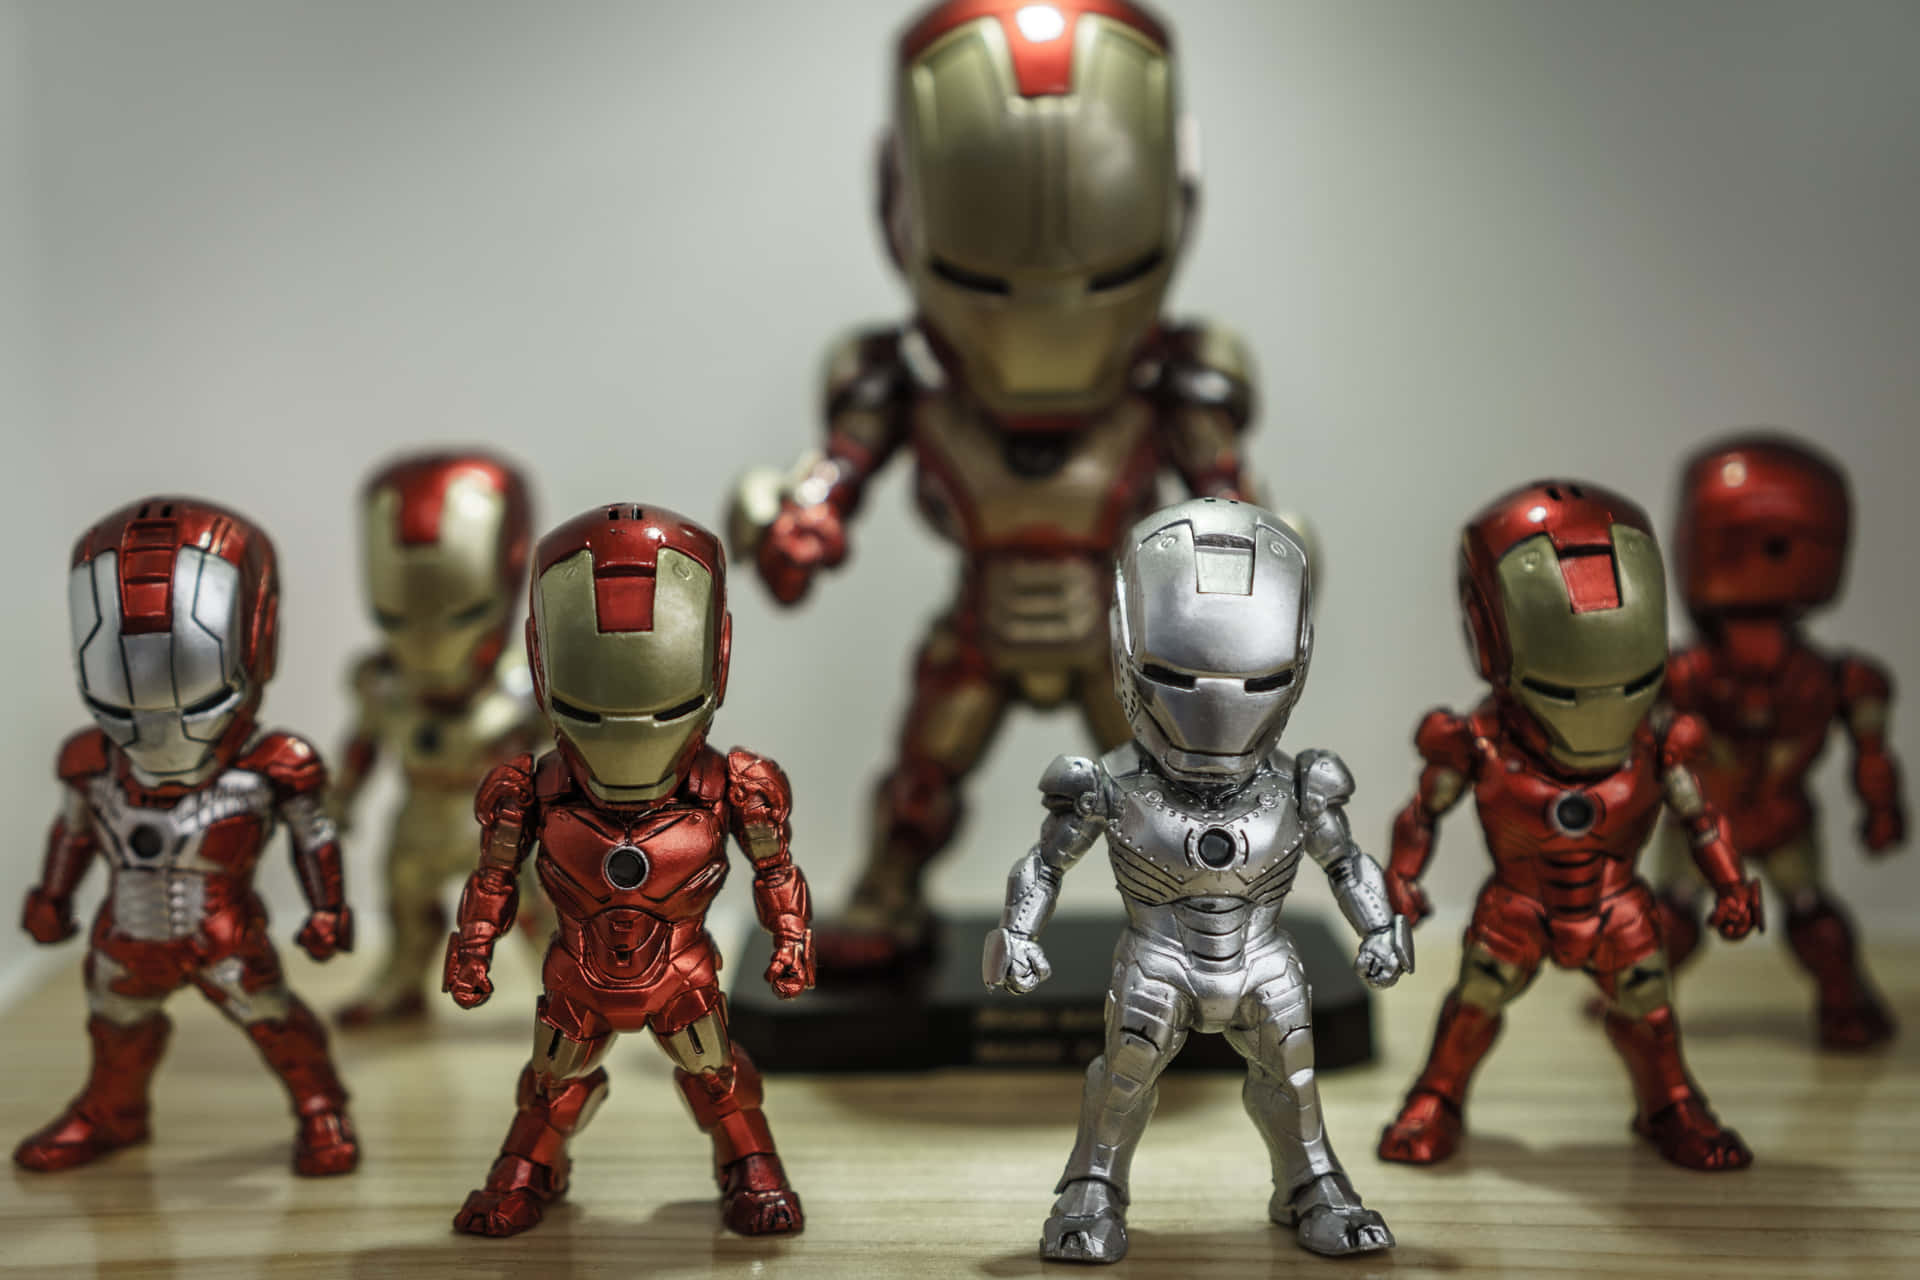 Collect and Display Your Love of Iron Man with Action Figure Wallpaper